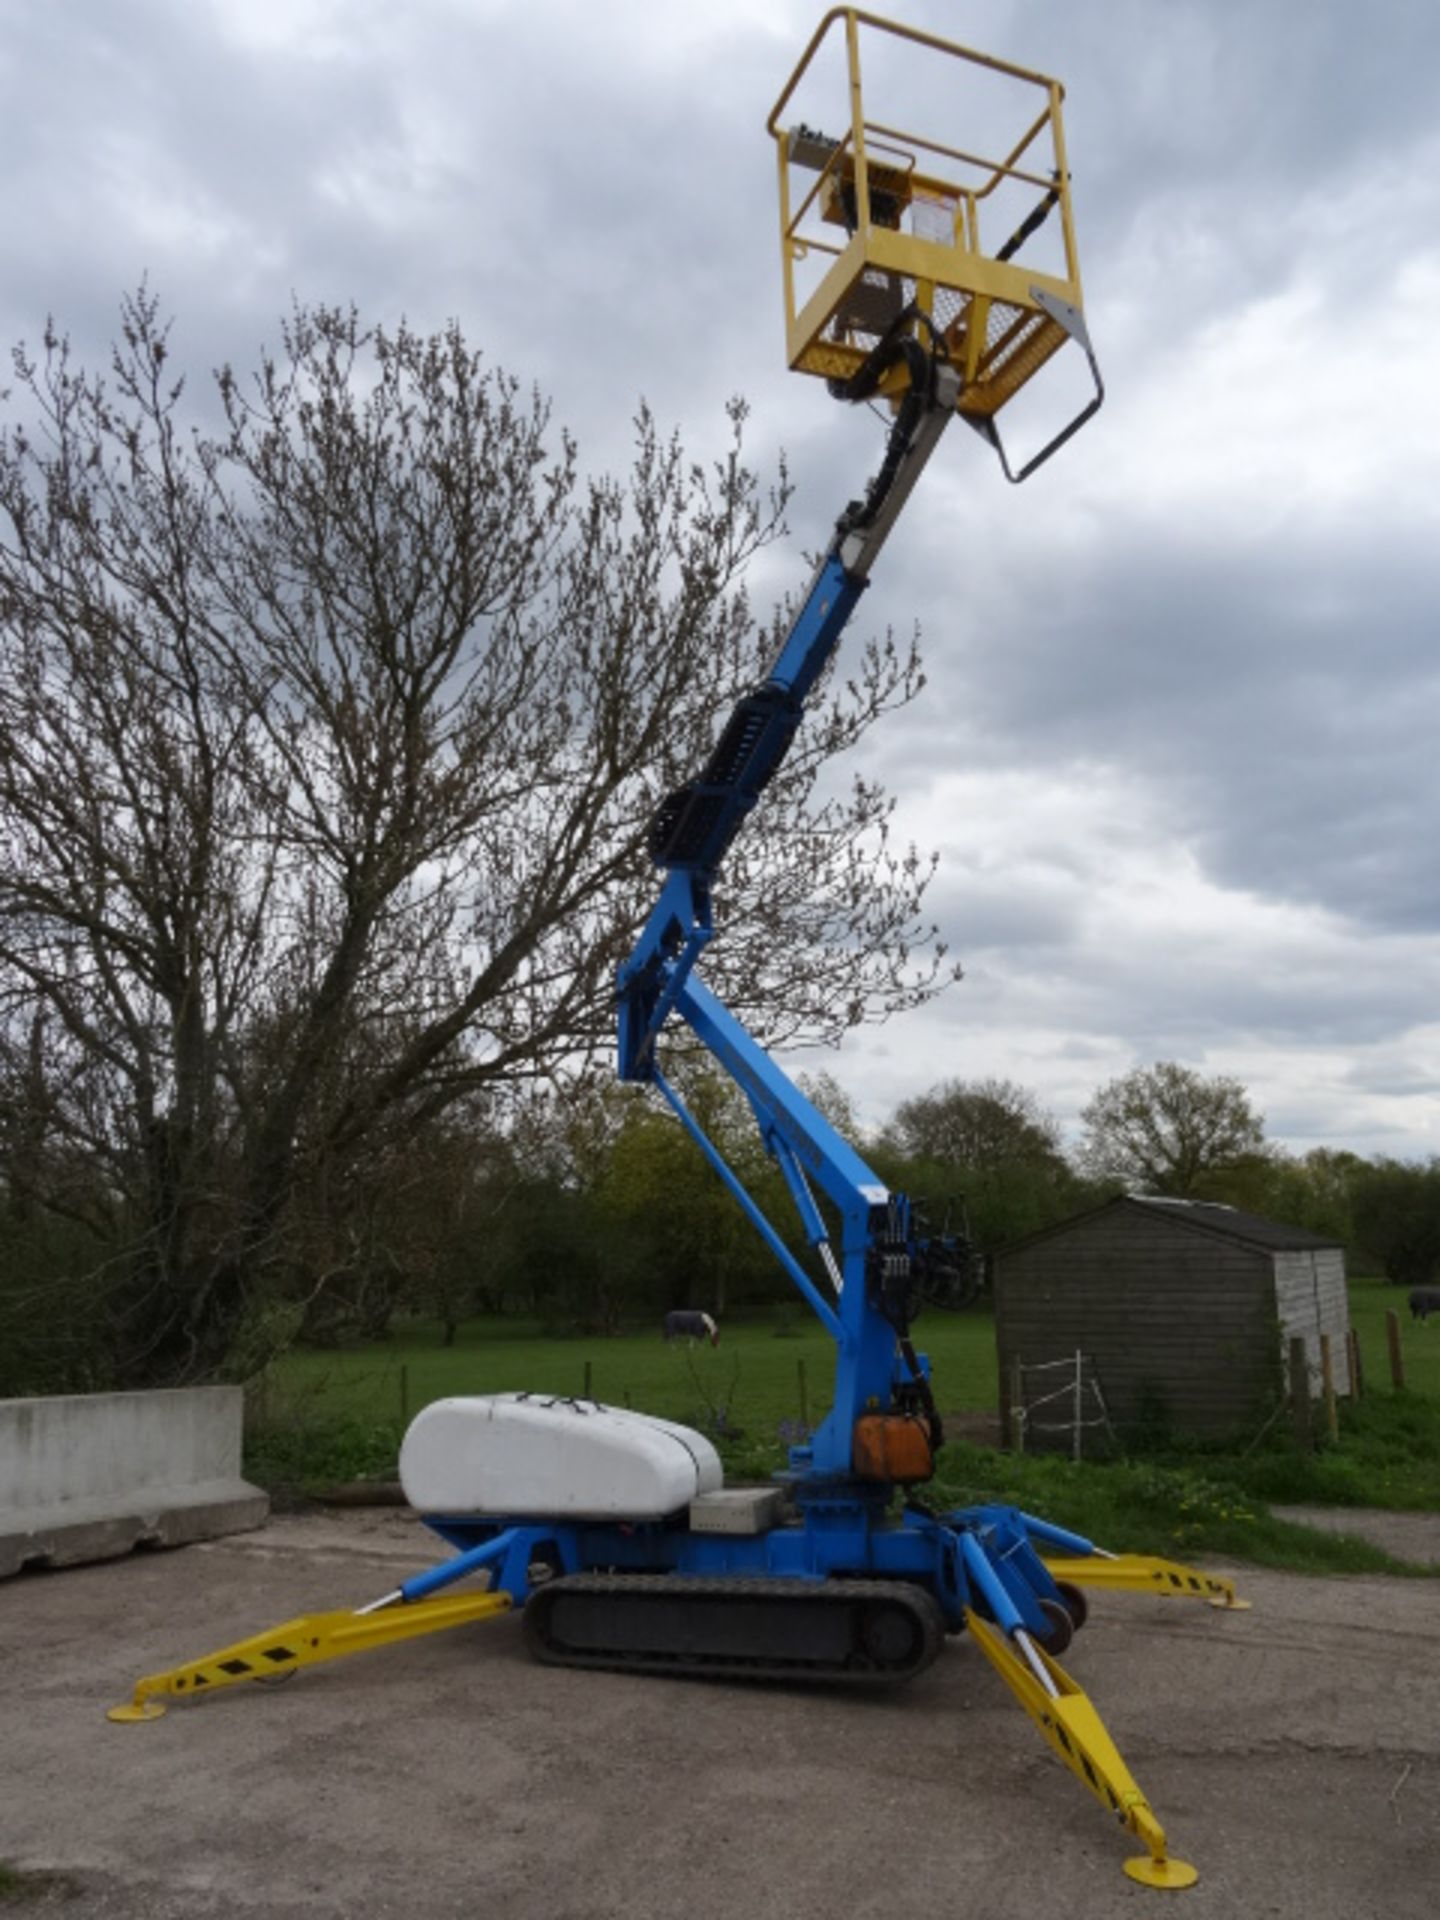 Niftylift TD 120 TDAC Year 2003 Tracked Drive Access Platform - Image 2 of 8